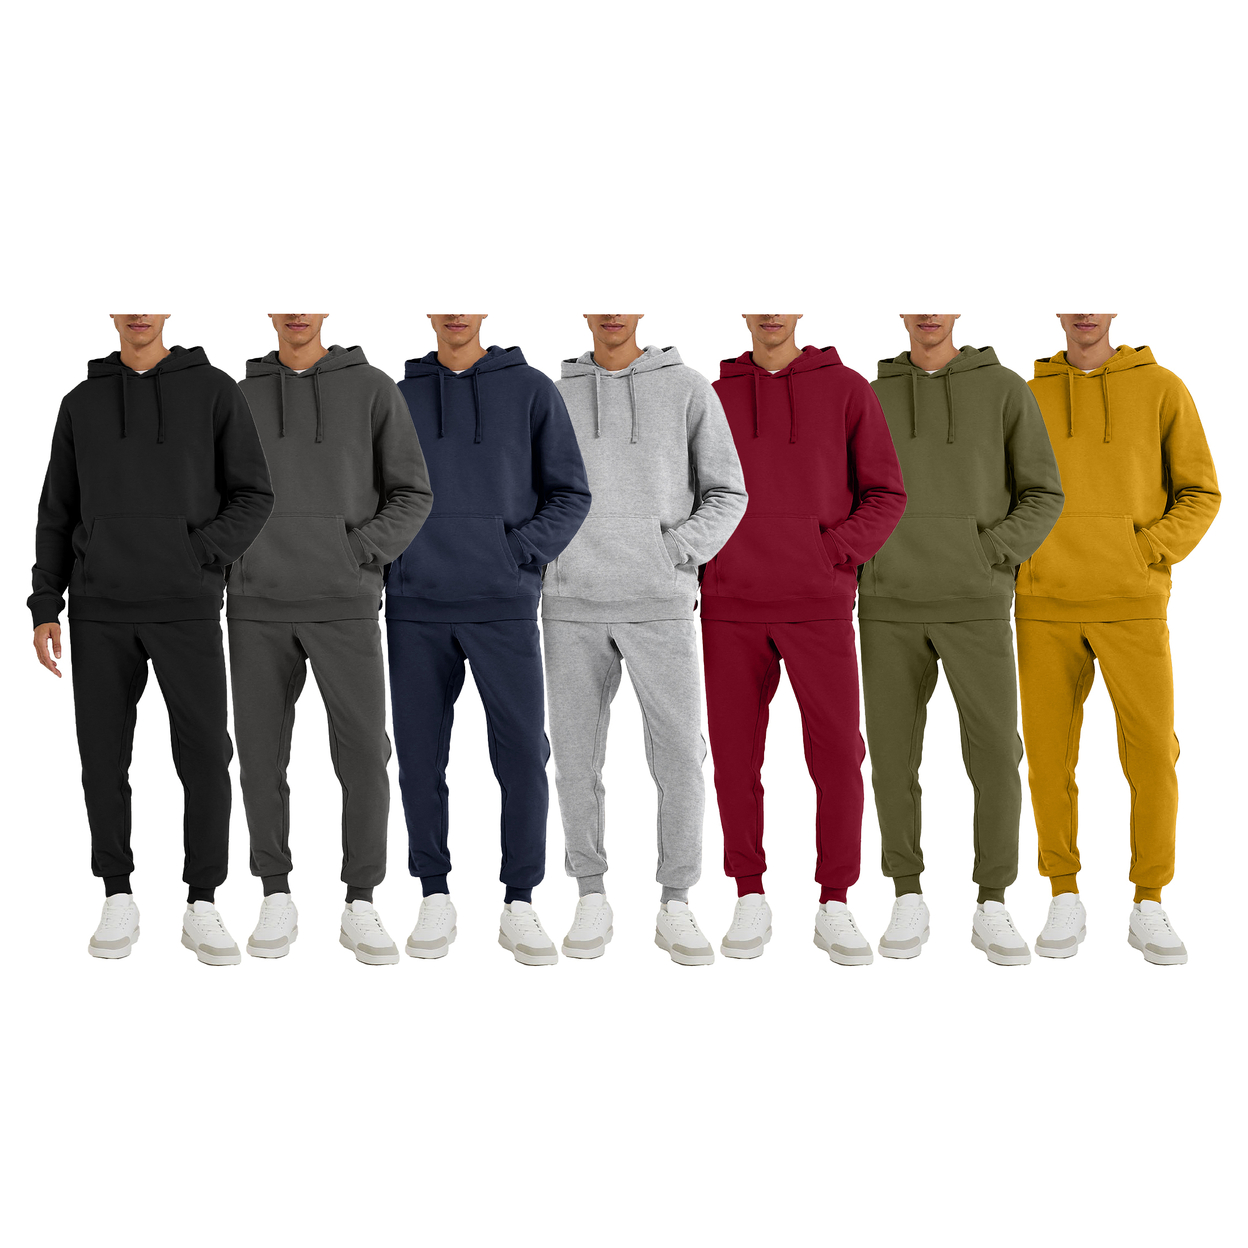 Multi-Pack: Men's Big & Tall Athletic Active Jogging Winter Warm Fleece Lined Pullover Tracksuit Set - Grey, 1-pack, Small